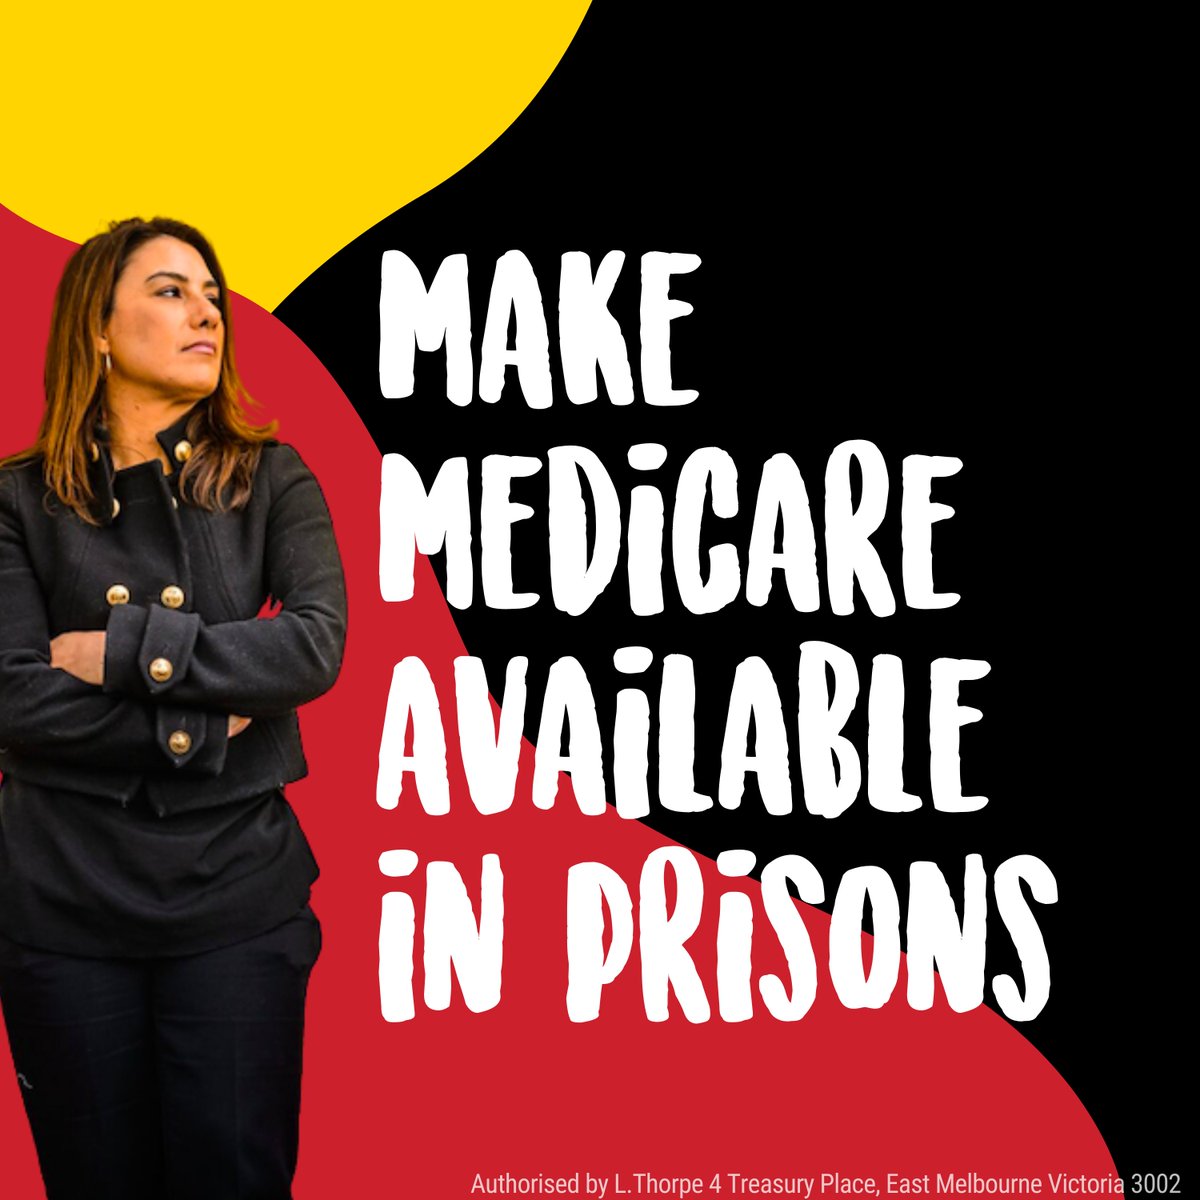 Senator Lidia Thorpe: The Medicare Taskforce Report completely ignores the fact that pe…